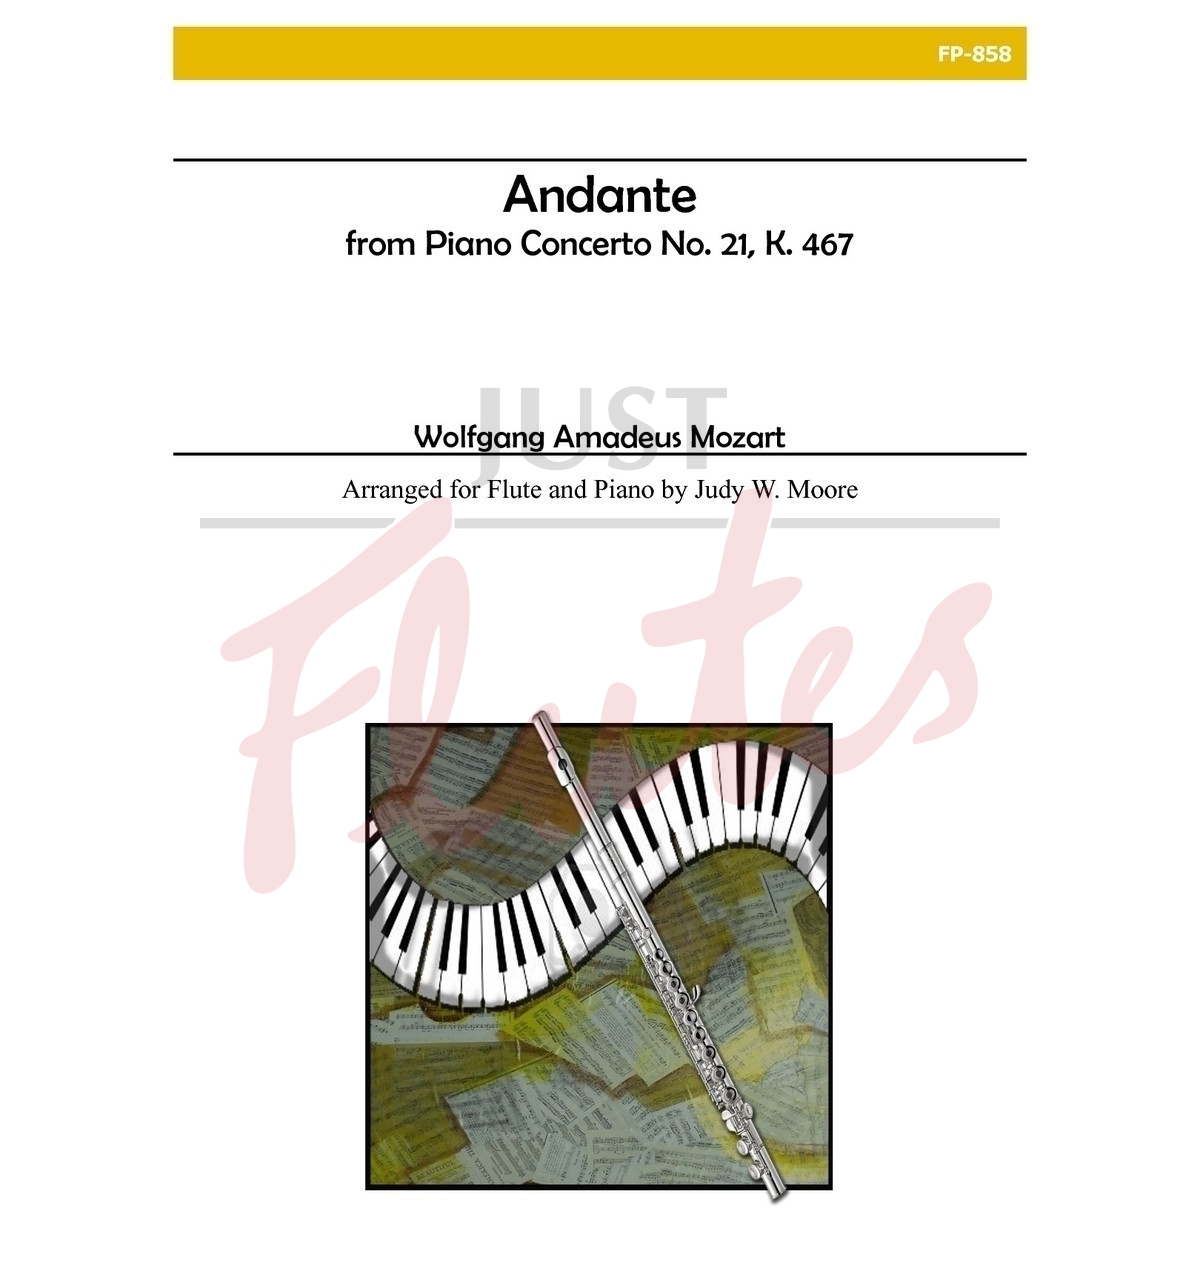 Andante from Piano Concerto No 21 arranged for flute and piano